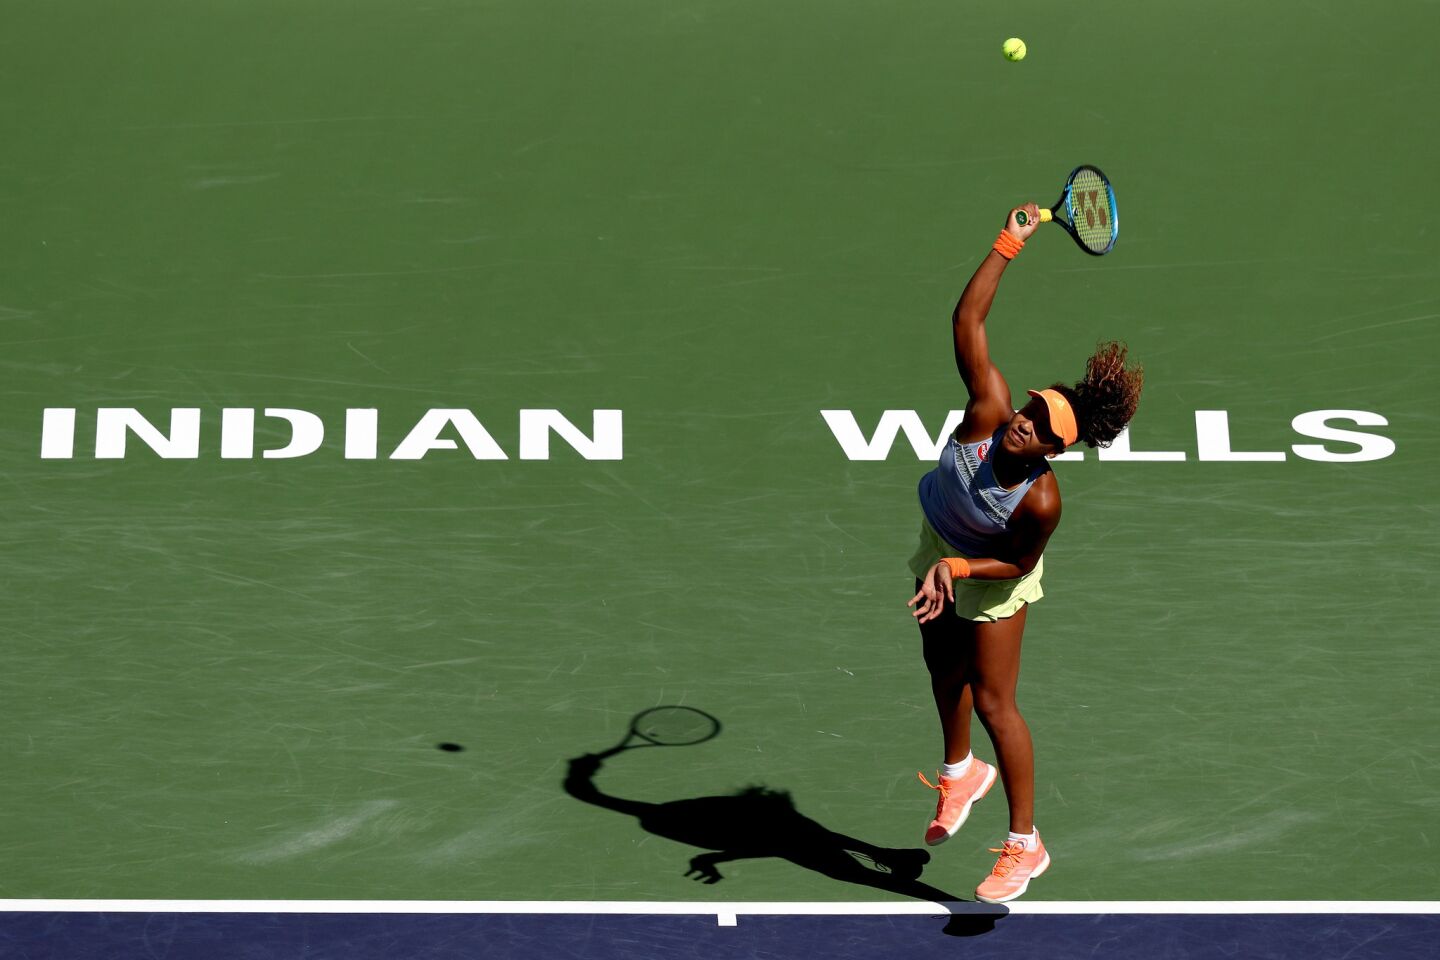 INDIAN WELLS, CA - MARCH 18: Naomi Osaka of Japan serves to Daria Kasatkina of Russia during the women's final on Day 14 of the BNP Paribas Open at the Indian Wells Tennis Garden on March 18, 2018 in Indian Wells, California. (Photo by Matthew Stockman/Getty Images) ** OUTS - ELSENT, FPG, CM - OUTS * NM, PH, VA if sourced by CT, LA or MoD **